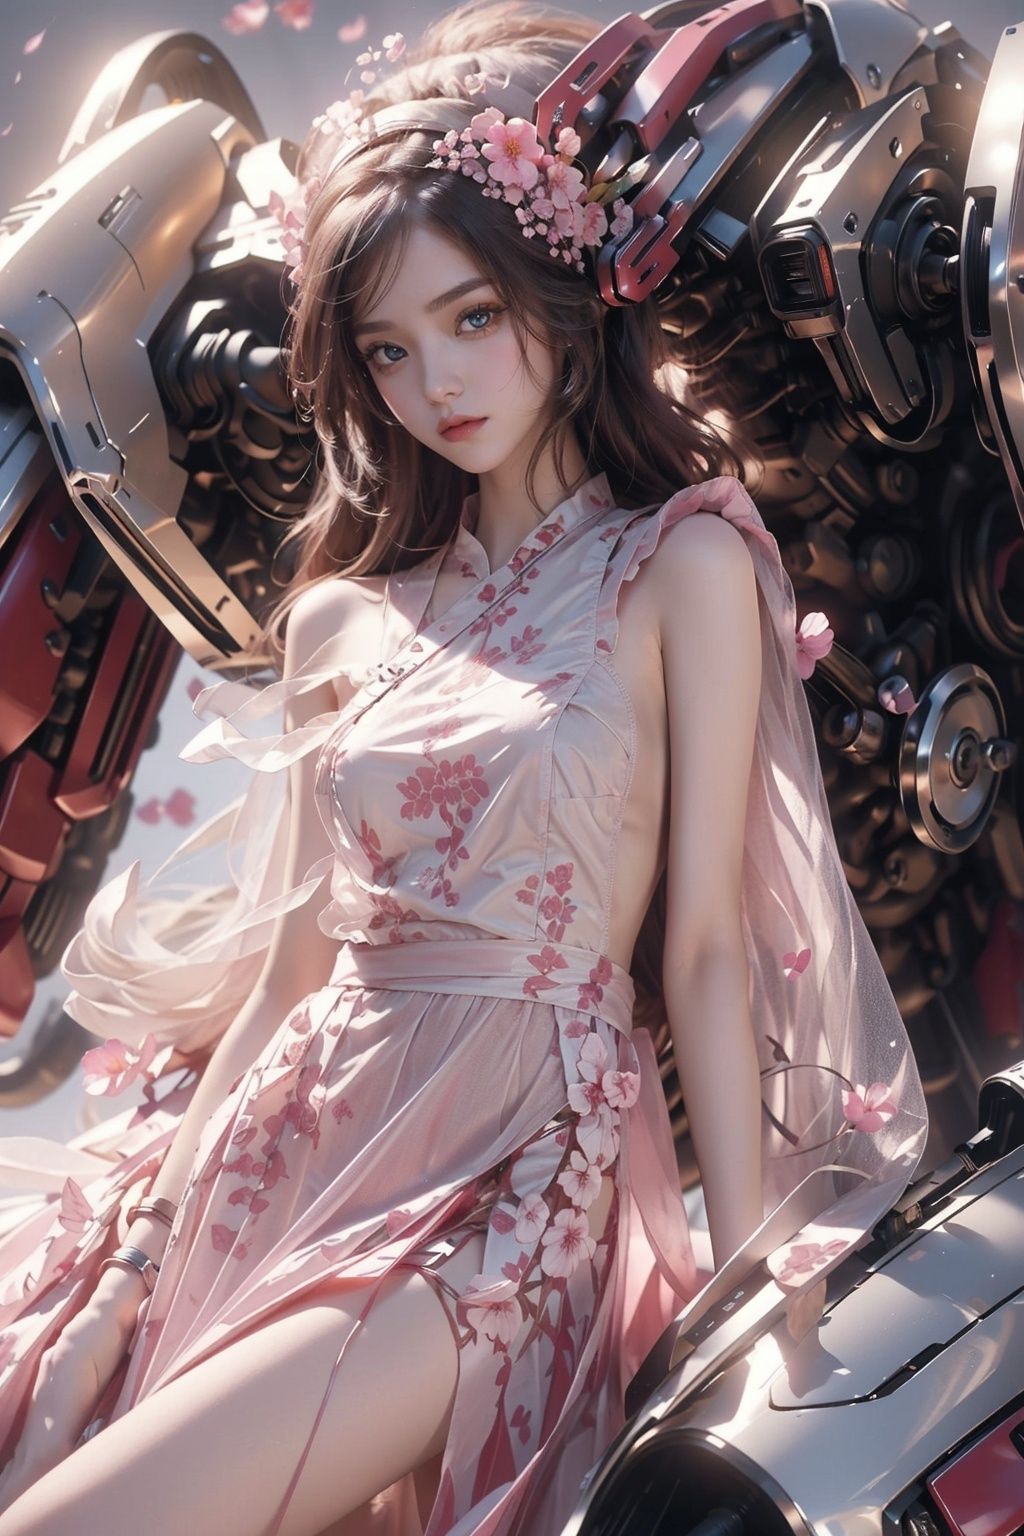 Sitting on the mecha, Flower lanterns, Strong winds, (((Wind blows long hair and dress: 1.9)), Long hair reaching the waist, (long hair flying: 1.5), Thin gauze semi transparent ancient clothing, Tang clothing, Han clothing. Thin gauze semi transparent red skirt. The skirt is very long. (((Night: 1.9))). Women, smiling, full chested, red tulle semi transparent Hanfu, bare feet, silver jewelry, elegant, lightweight, confident, flower posture, wisdom, charming charm, purity, nobility, artistry, beauty, (best quality), masterpiece, highlights, (original), extremely detailed wallpaper, (original: 1.5), (masterpiece: 1.3), (high resolution: 1.3), (an extremely detailed 32k wallpaper: 1.3), (best quality), Highest image quality, exquisite CG, high quality, high completion, depth of field, (1 girl: 1.5), (an extremely delicate and beautiful girl: 1.5), (perfect whole body details: 1.5), beautiful and delicate nose, beautiful and delicate lips, beautiful and delicate eyes, (clear eyes: 1.3), beautiful and delicate facial features, beautiful and delicate face, hand processing, hand optimization, hand detail optimization, hand detail processing, detailed beautiful clothes, complex details, Extreme detail portrayal, HDR, detailed background, realistic, (transparent PViridescent colors: 1.3),1girl,girl,Chinese art,Super long legs,2D conceptual design,Pink Machine,spread leg,machinery,shidudou,Naked apron,huliya,少女